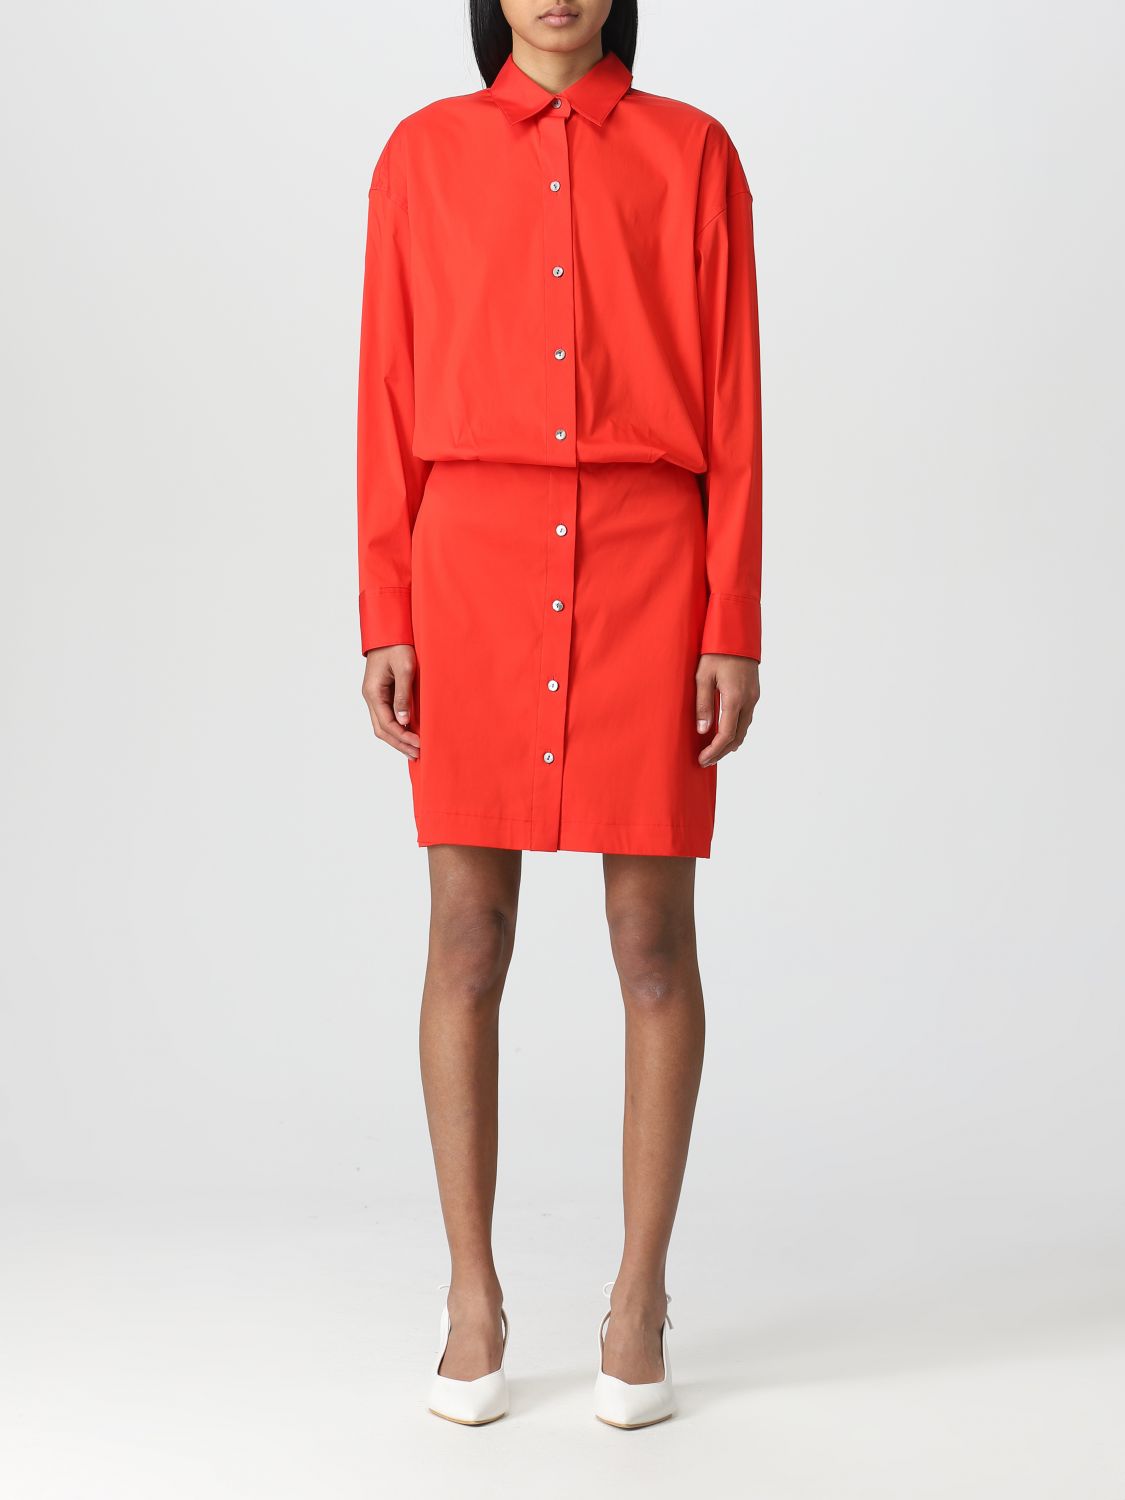 THEORY: dress for woman - Red | Theory dress N0104613 online on GIGLIO.COM